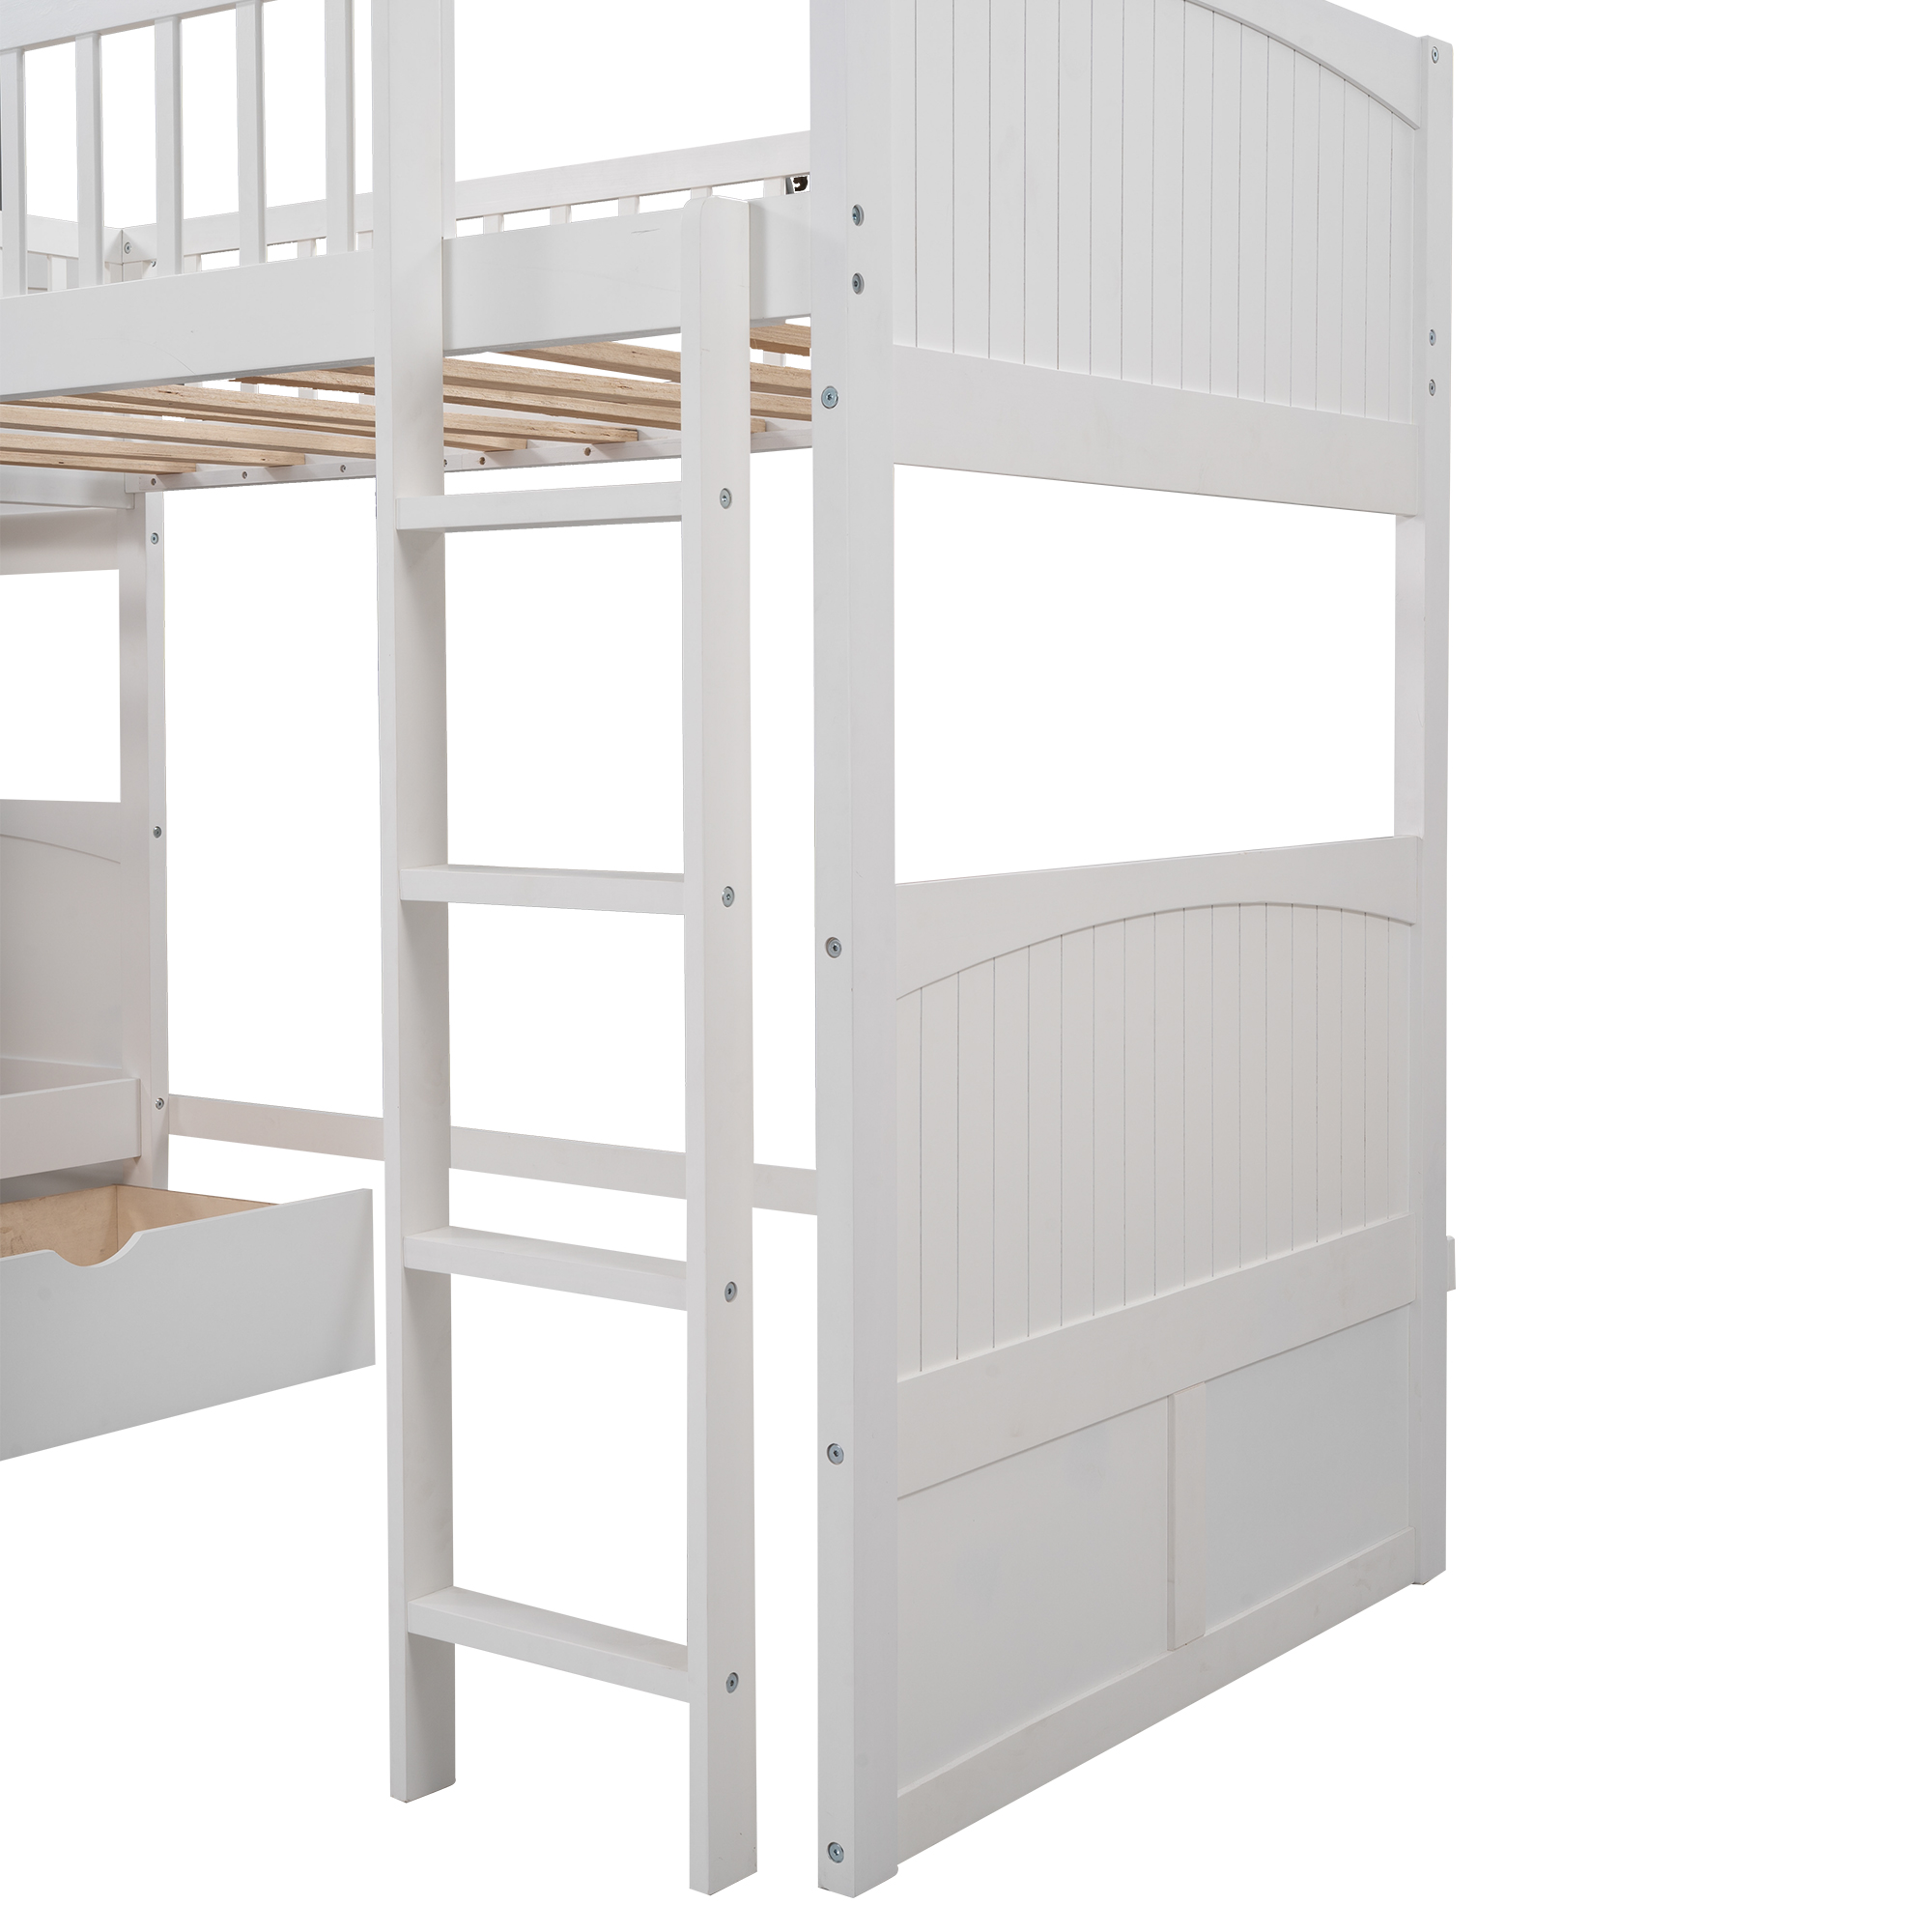 Euroco Wood Bunk Bed Storage, Twin-over-Twin-over-Twin for Children's Bedroom, White - image 7 of 12